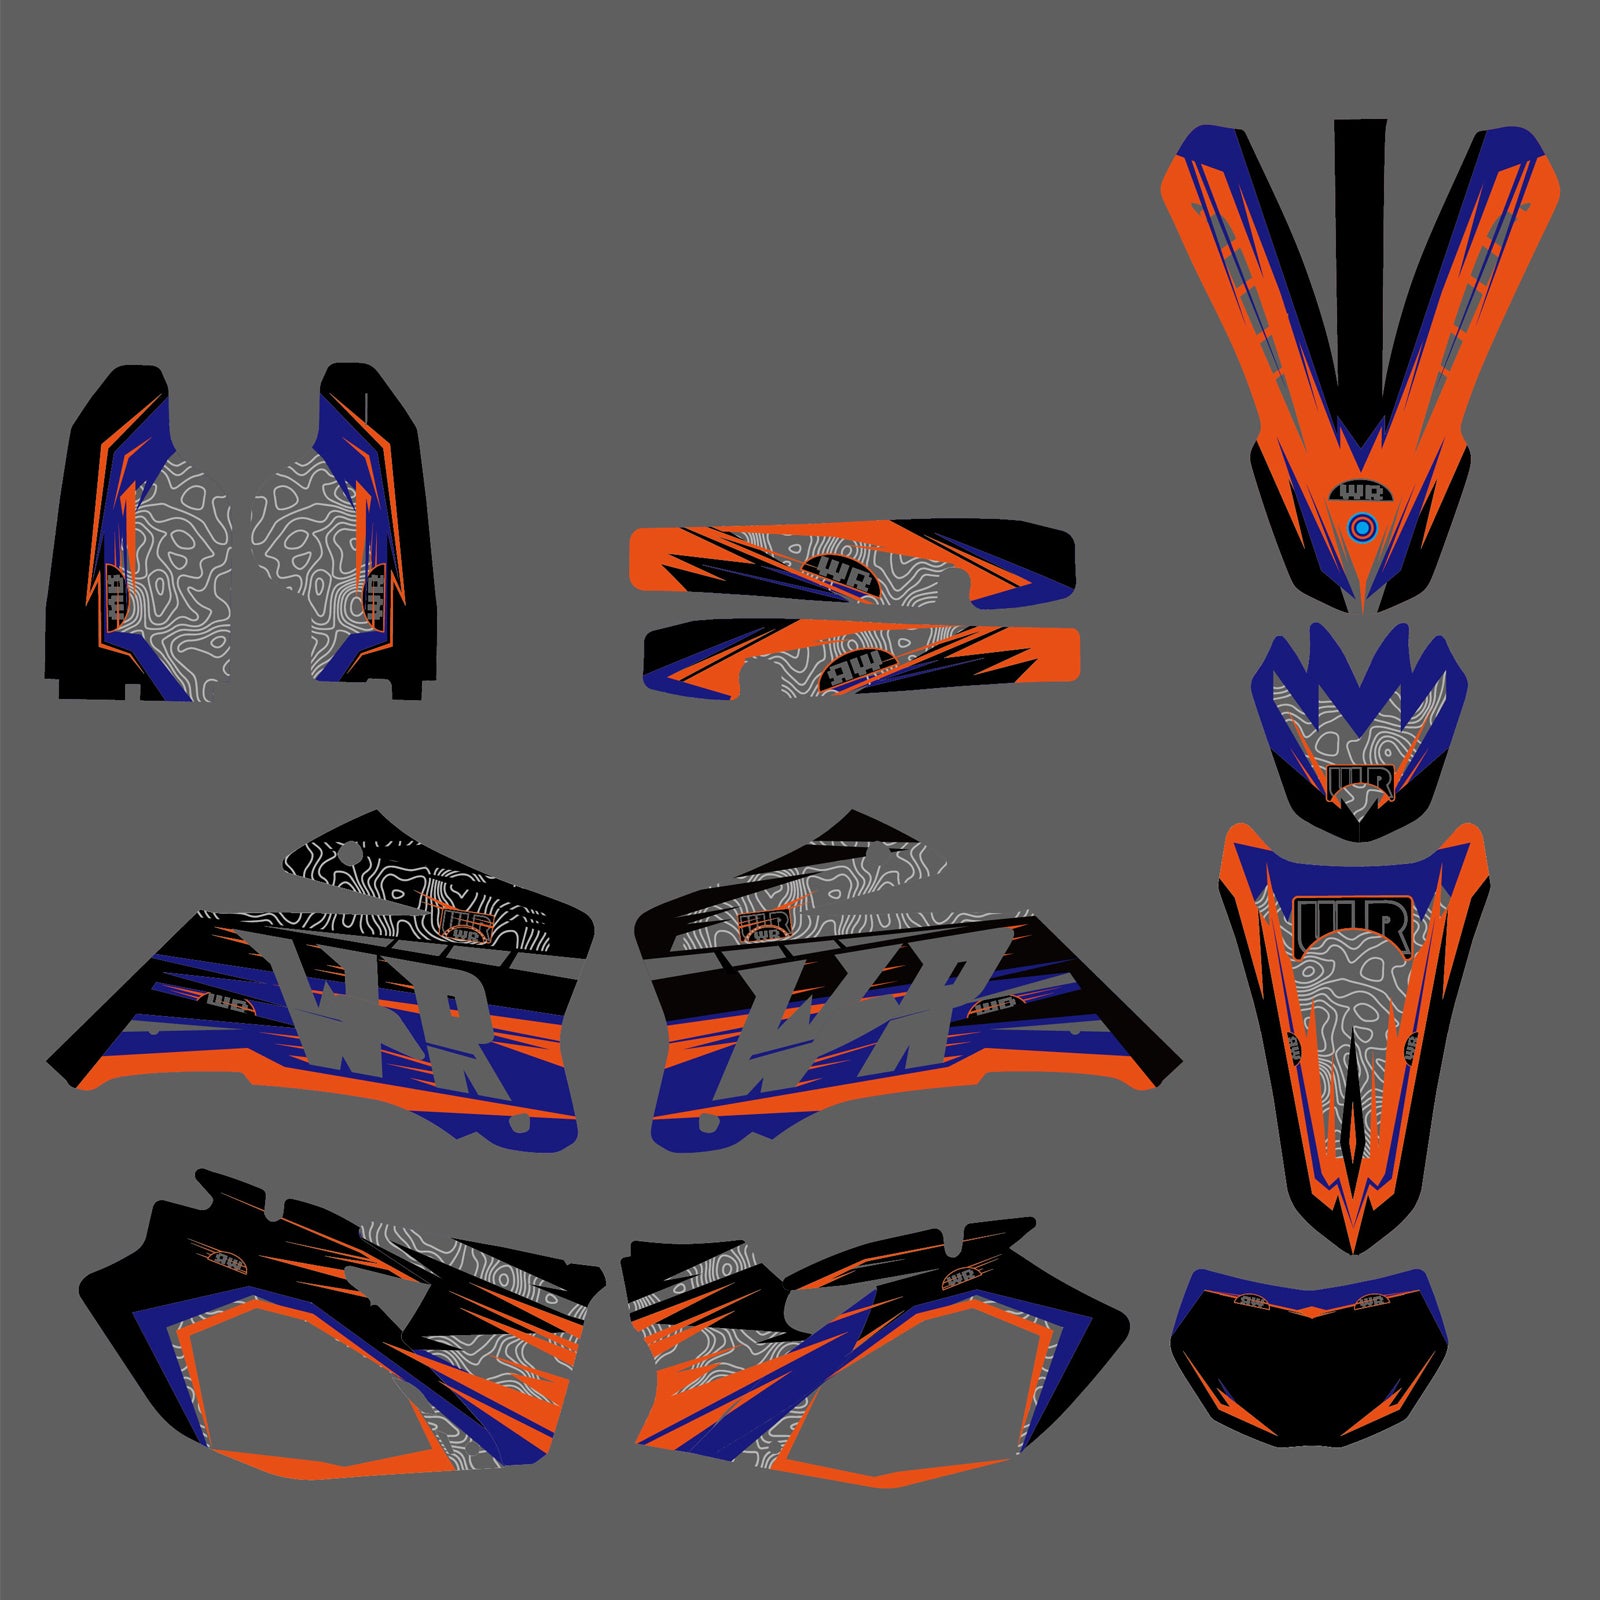 Team Decals Stickers Graphics Kit For Yamaha WR250F WR450F 2007-2011